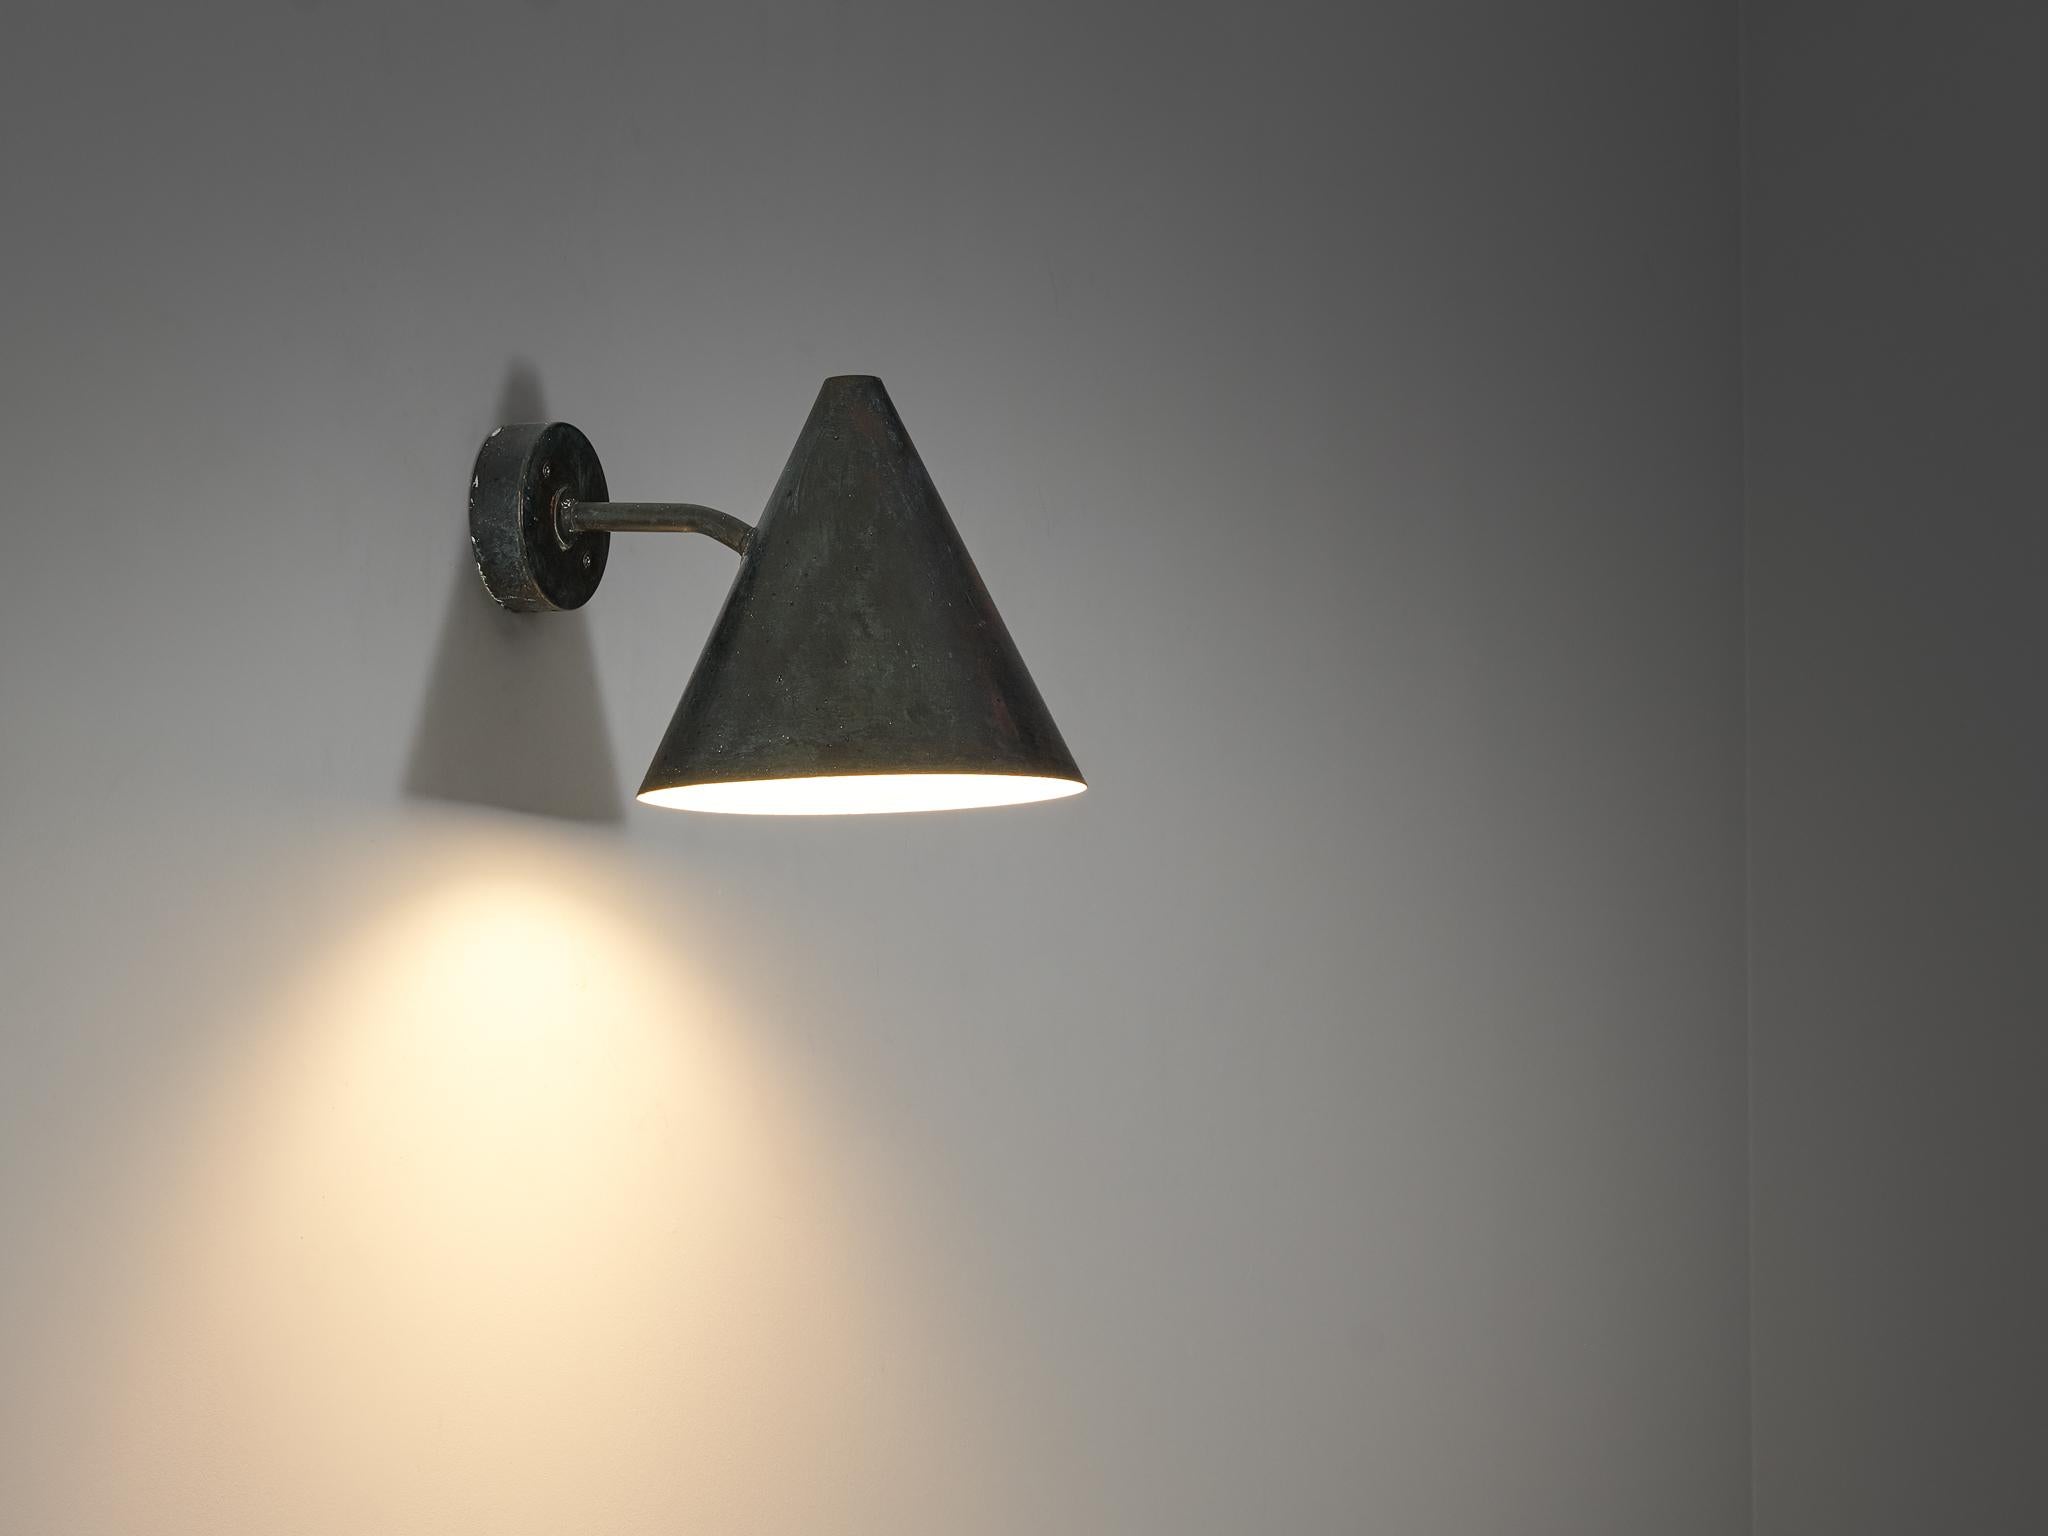 Hans-Agne Jakobsson for Hans-Agne Jakobsson AB in Markaryd, wall light ‘Tratten’, copper, Sweden, 1950s

Hans-Agne Jakobsson designed this wall light 'Tratten', which is made in a beautiful copper. The conical-shaped shade is secured to a slightly